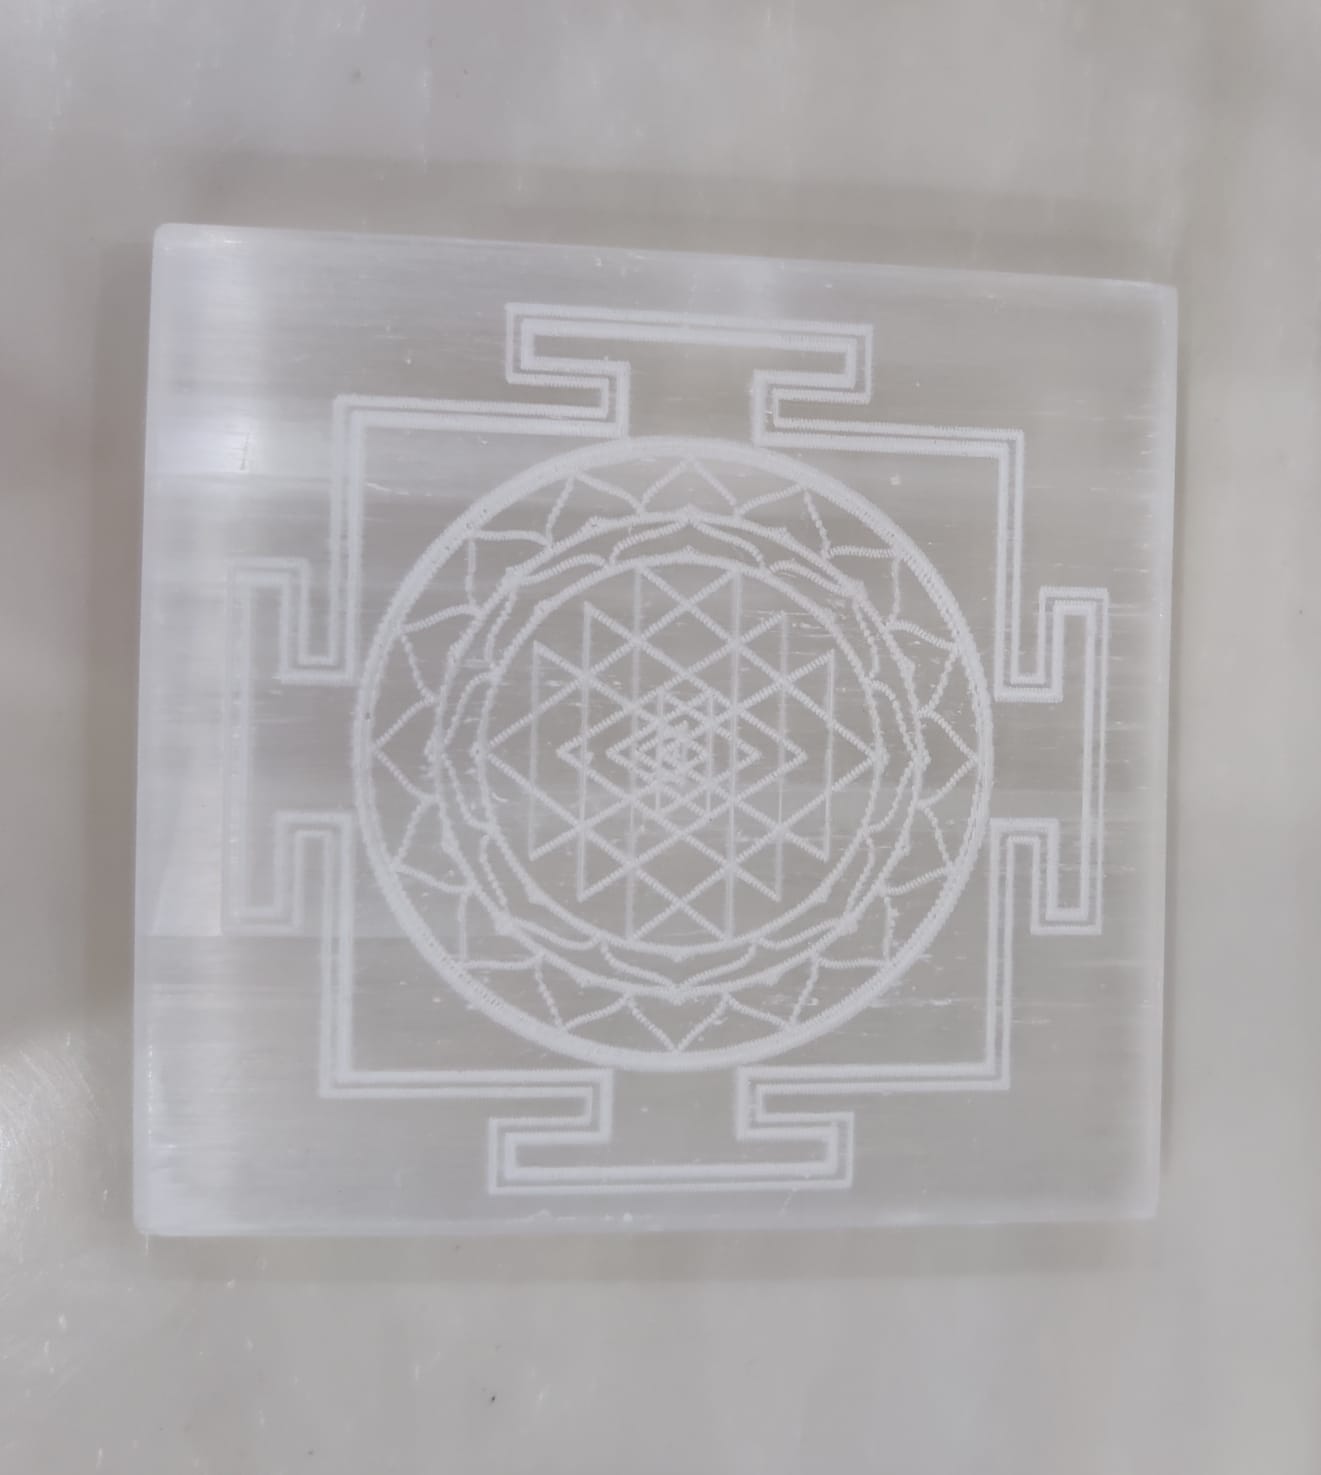 Selenite Plate(For Charging)3 inch